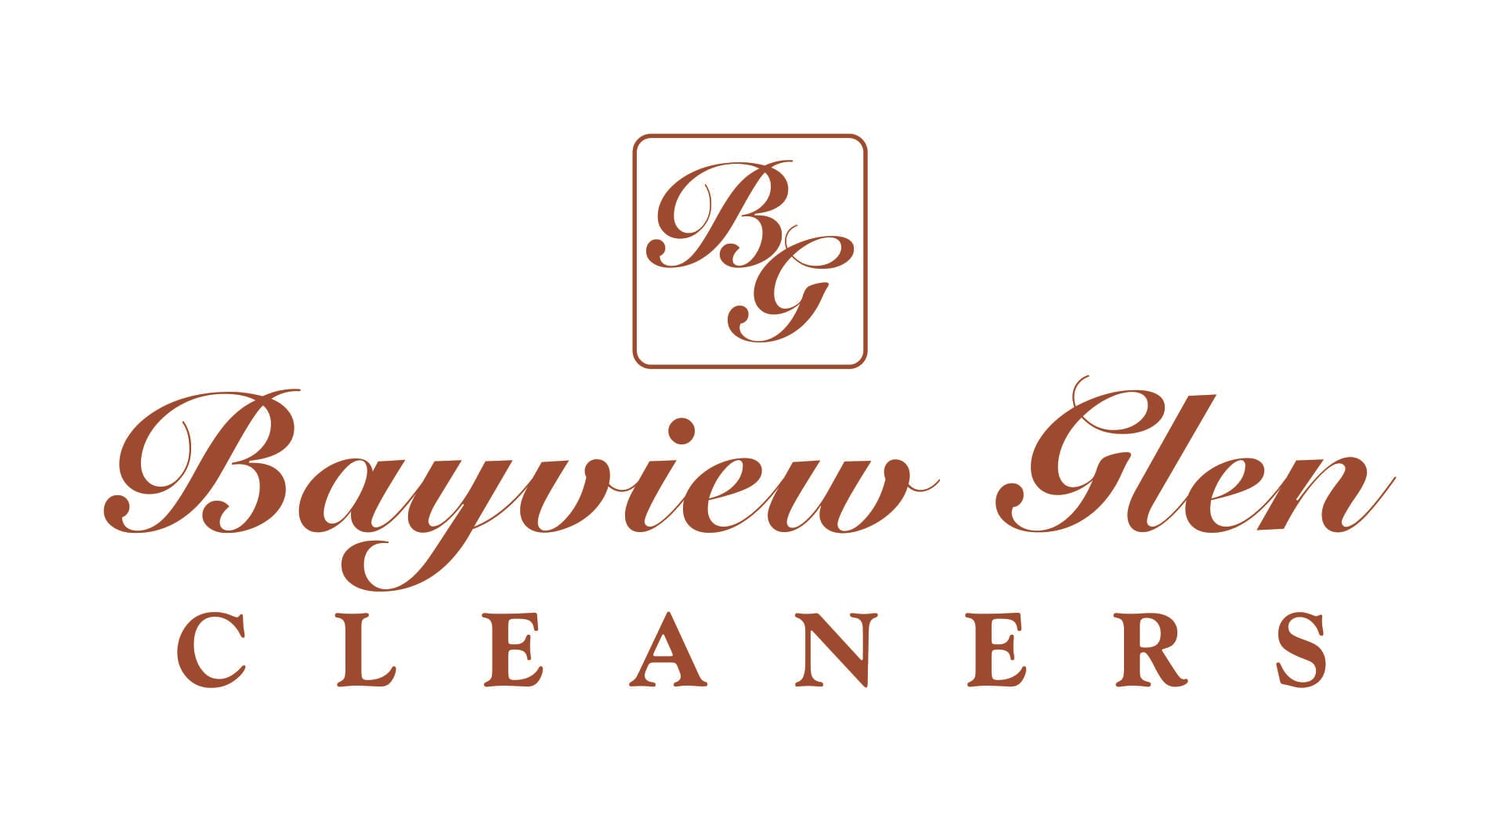 Bayview Glen Cleaners (Richmond Hill) - Dry Cleaning, Alterations, Laundry, Linens, Curtains, Drapes, Bridal